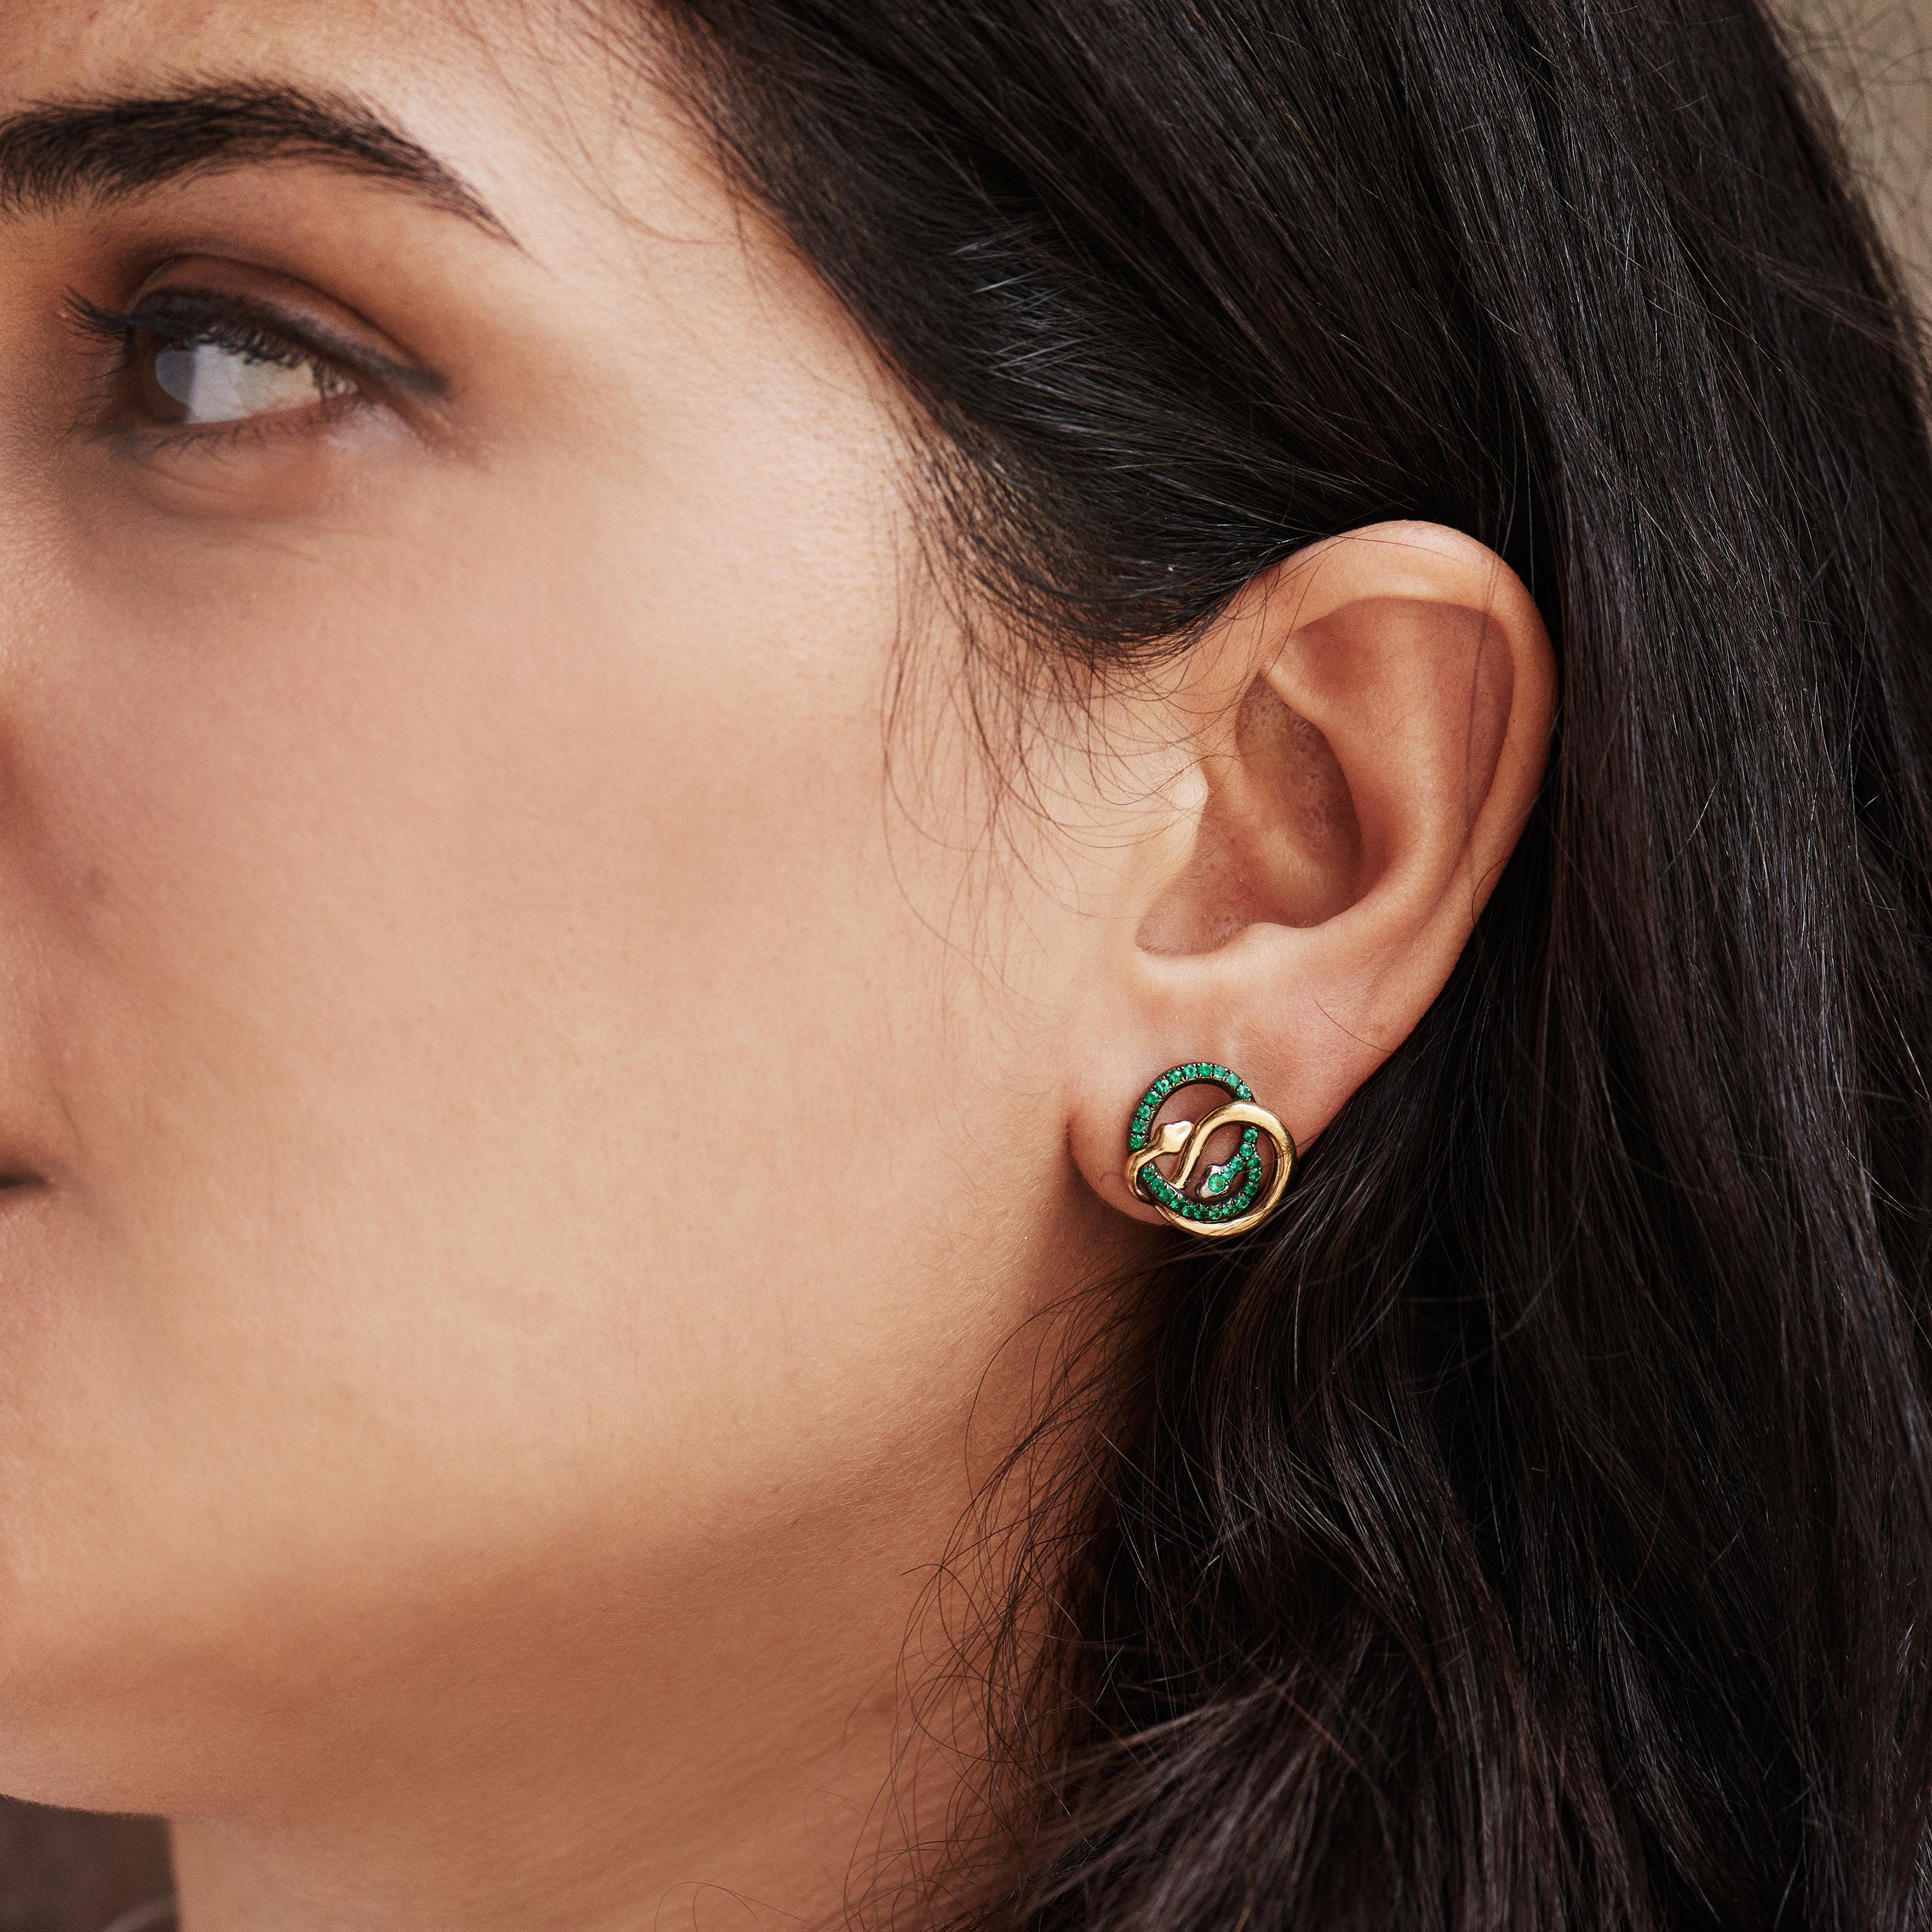 This AENEA Design Sarpa Earrings are inspired by the 1920s Faberge and Cartier works, adapted for the new millennium.

Elegant and intricate, this Stud Earrings will always be amazingly eye catching.

The fantastic Brazilian Emeralds are combined